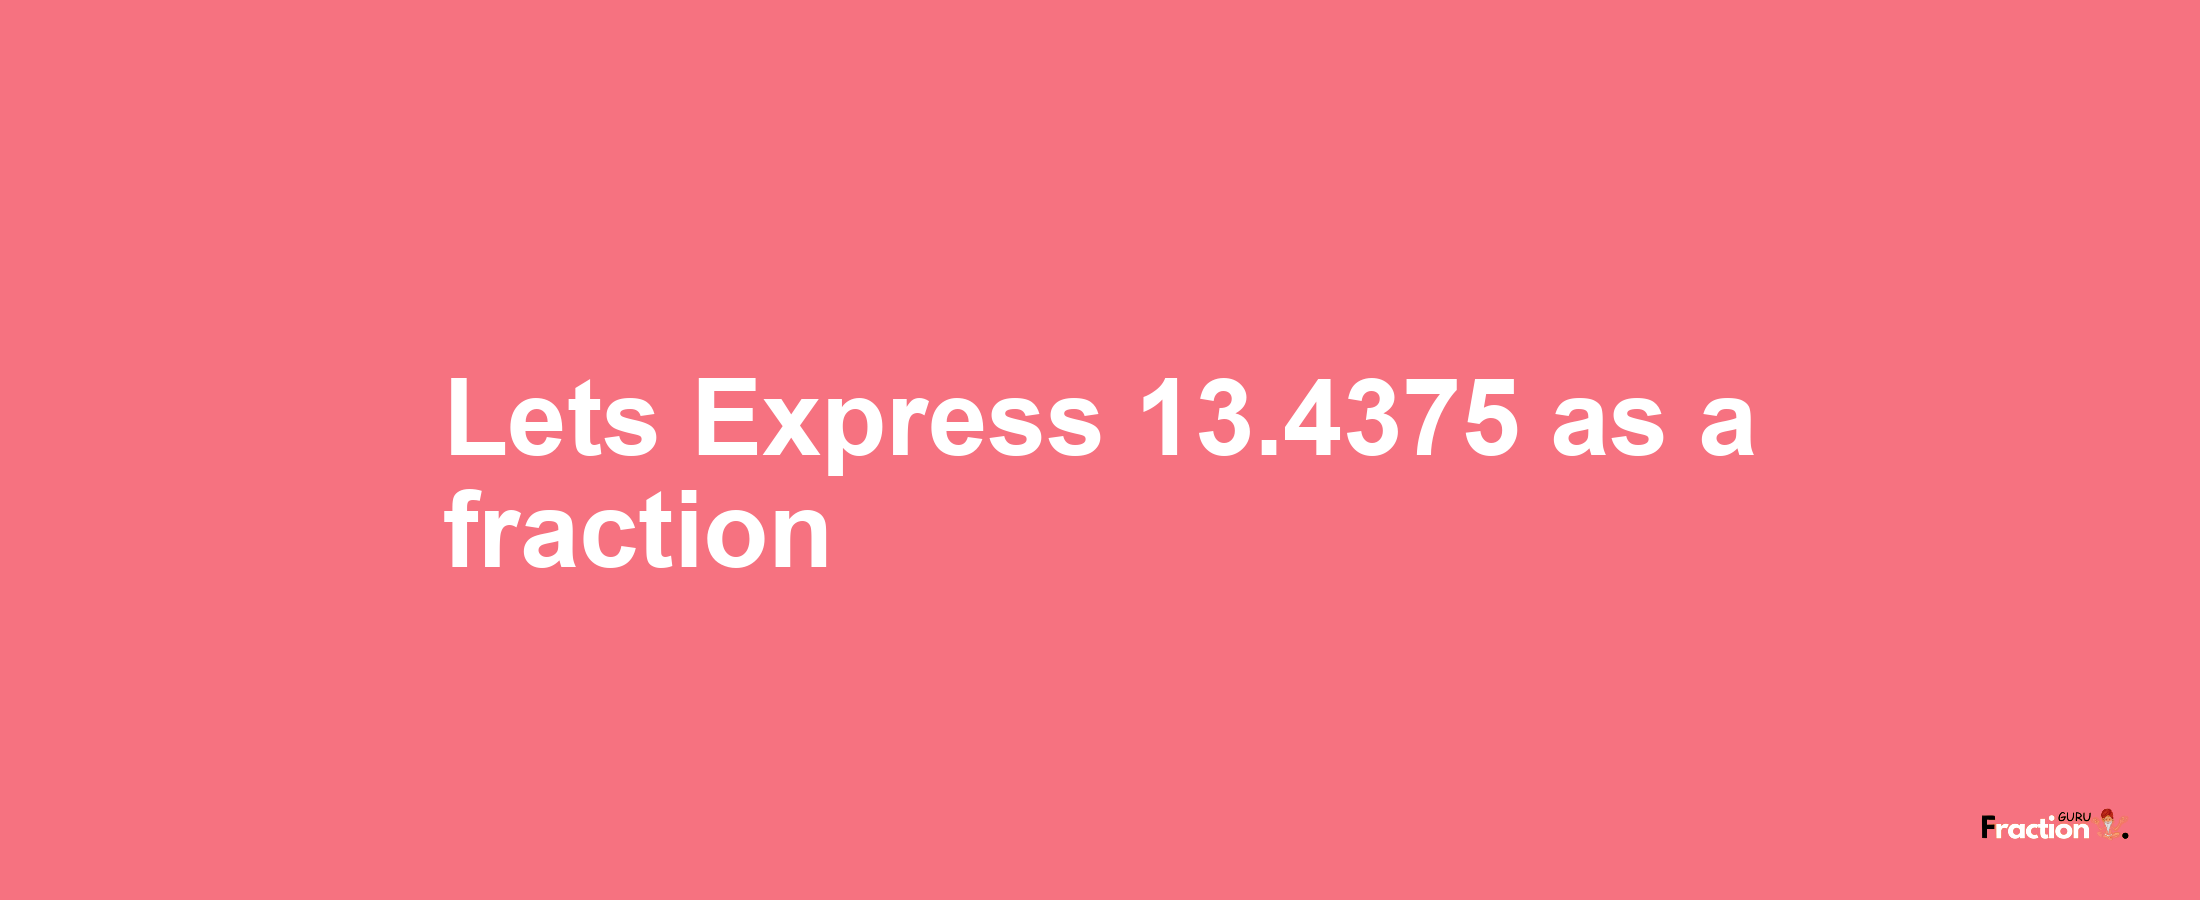 Lets Express 13.4375 as afraction